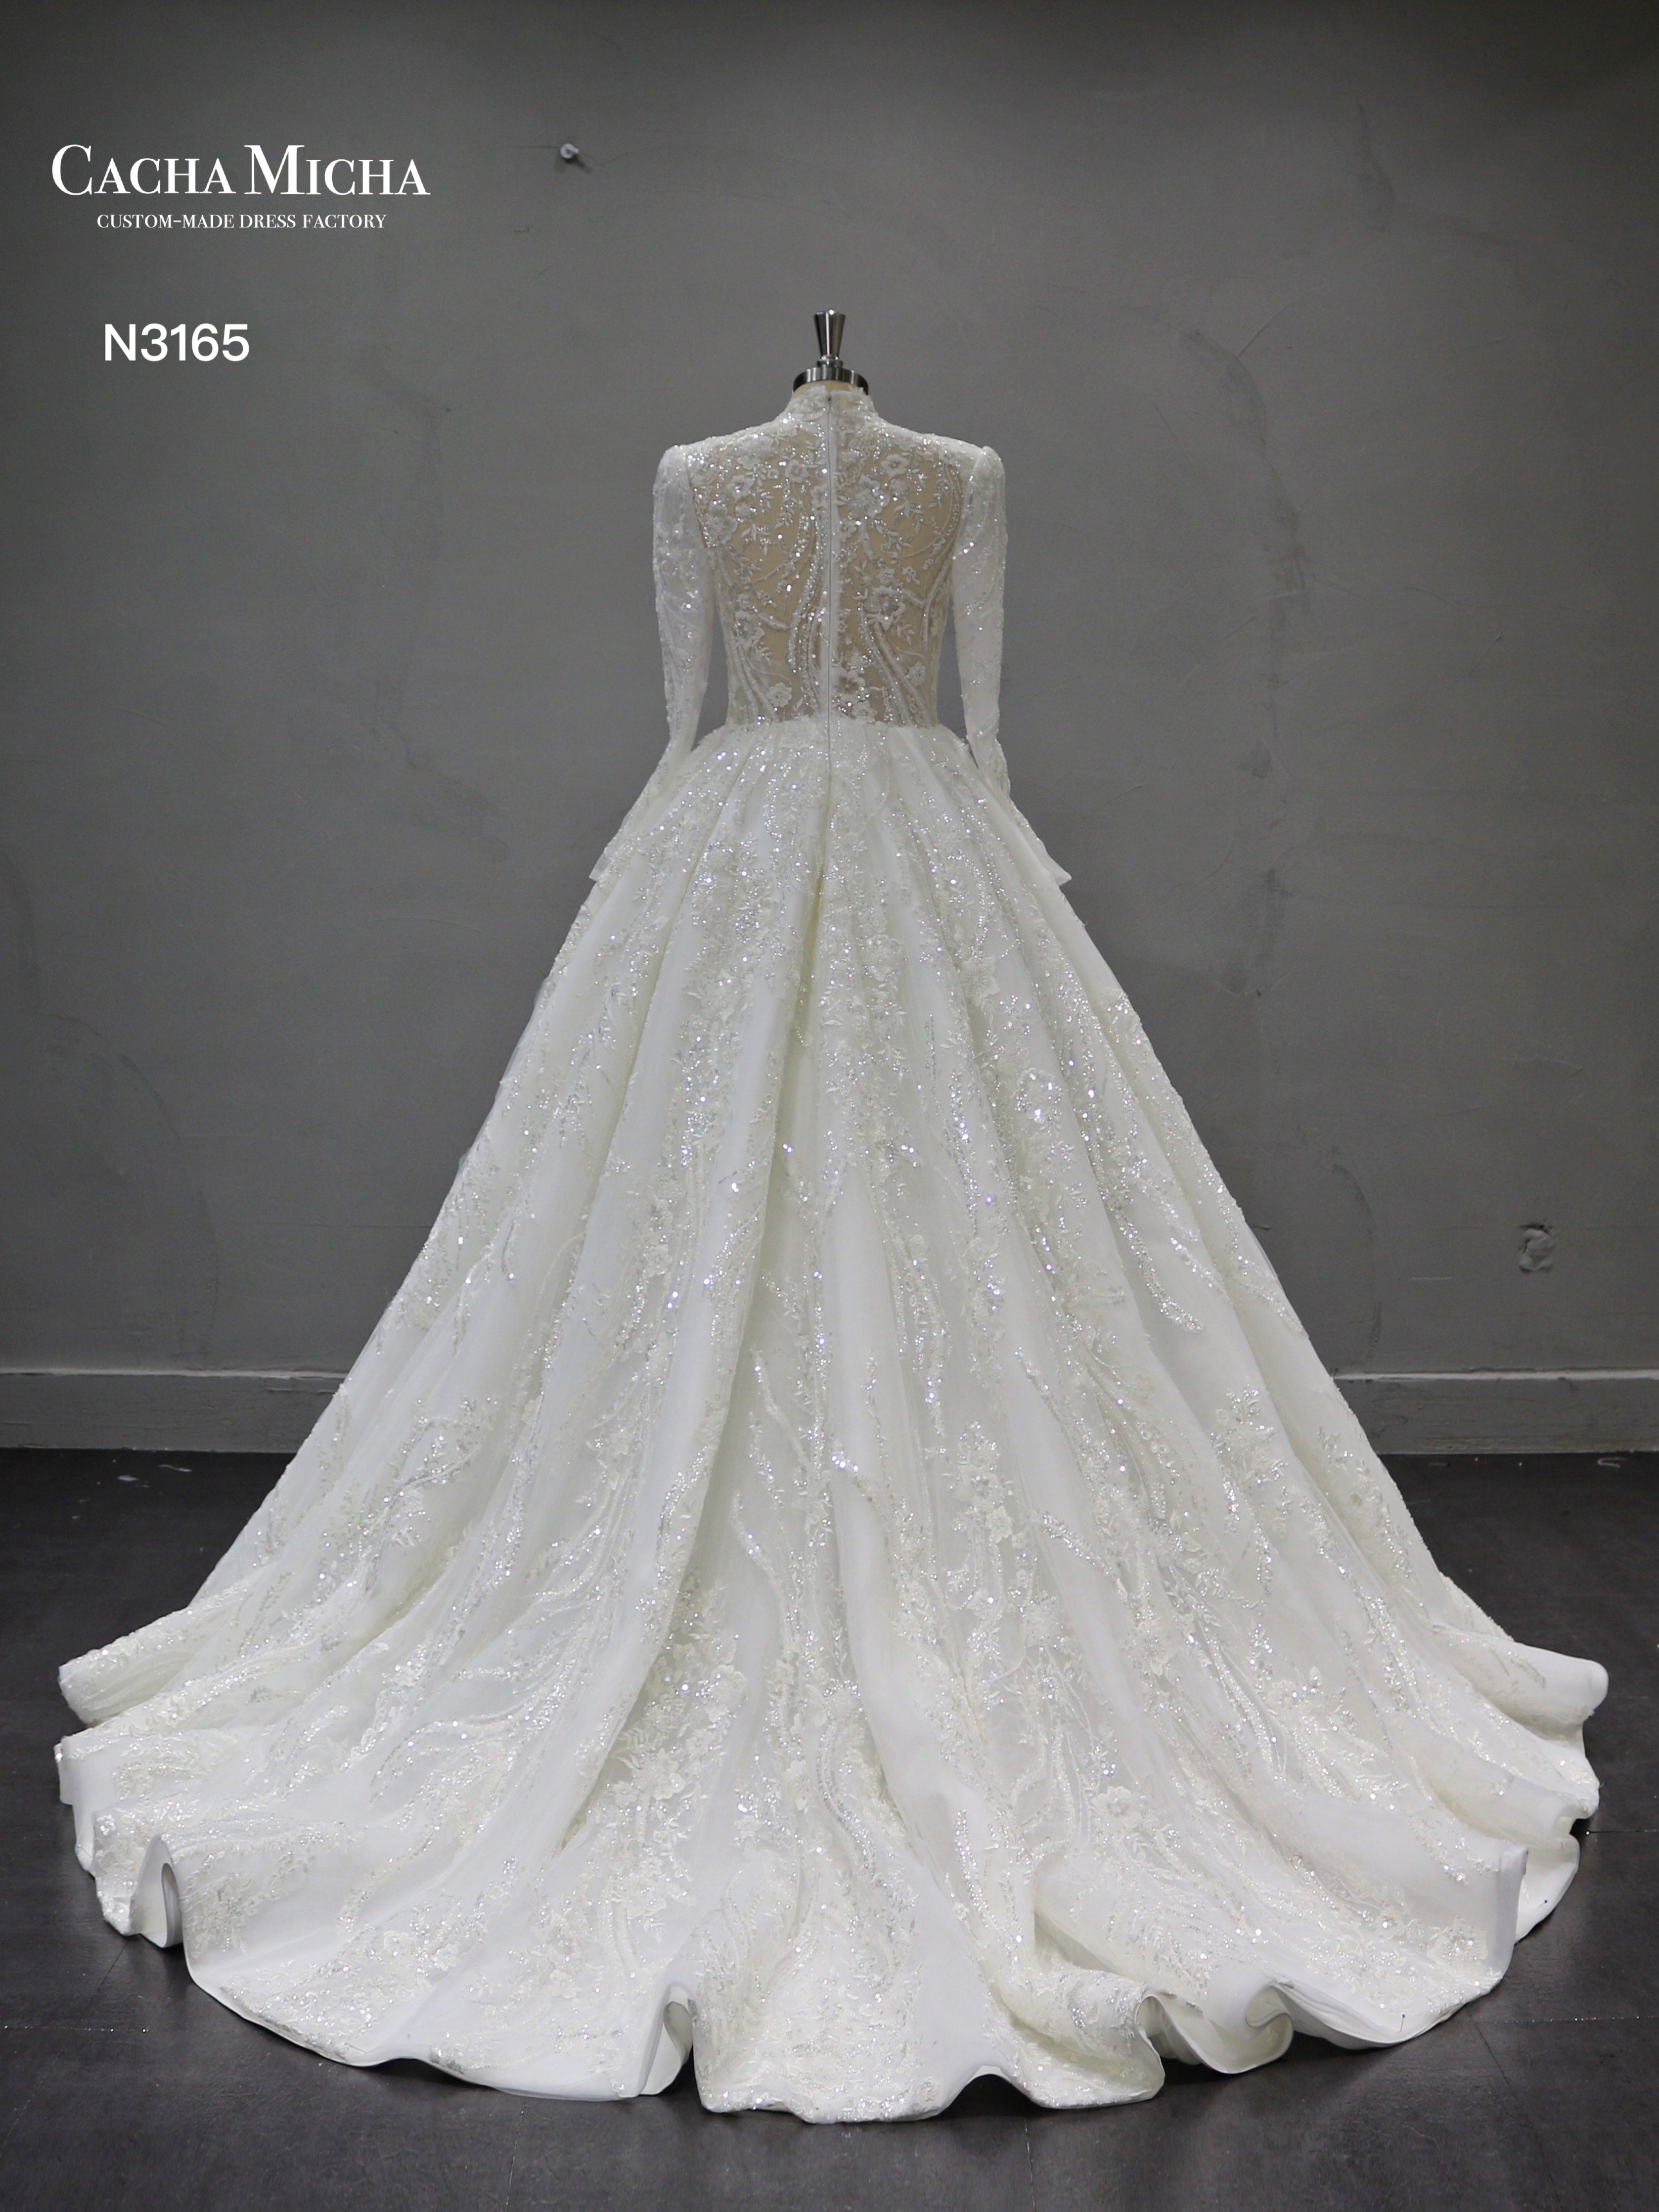 Stunning Luxury Beaded Lace Ball Gown Wedding Dress N3165